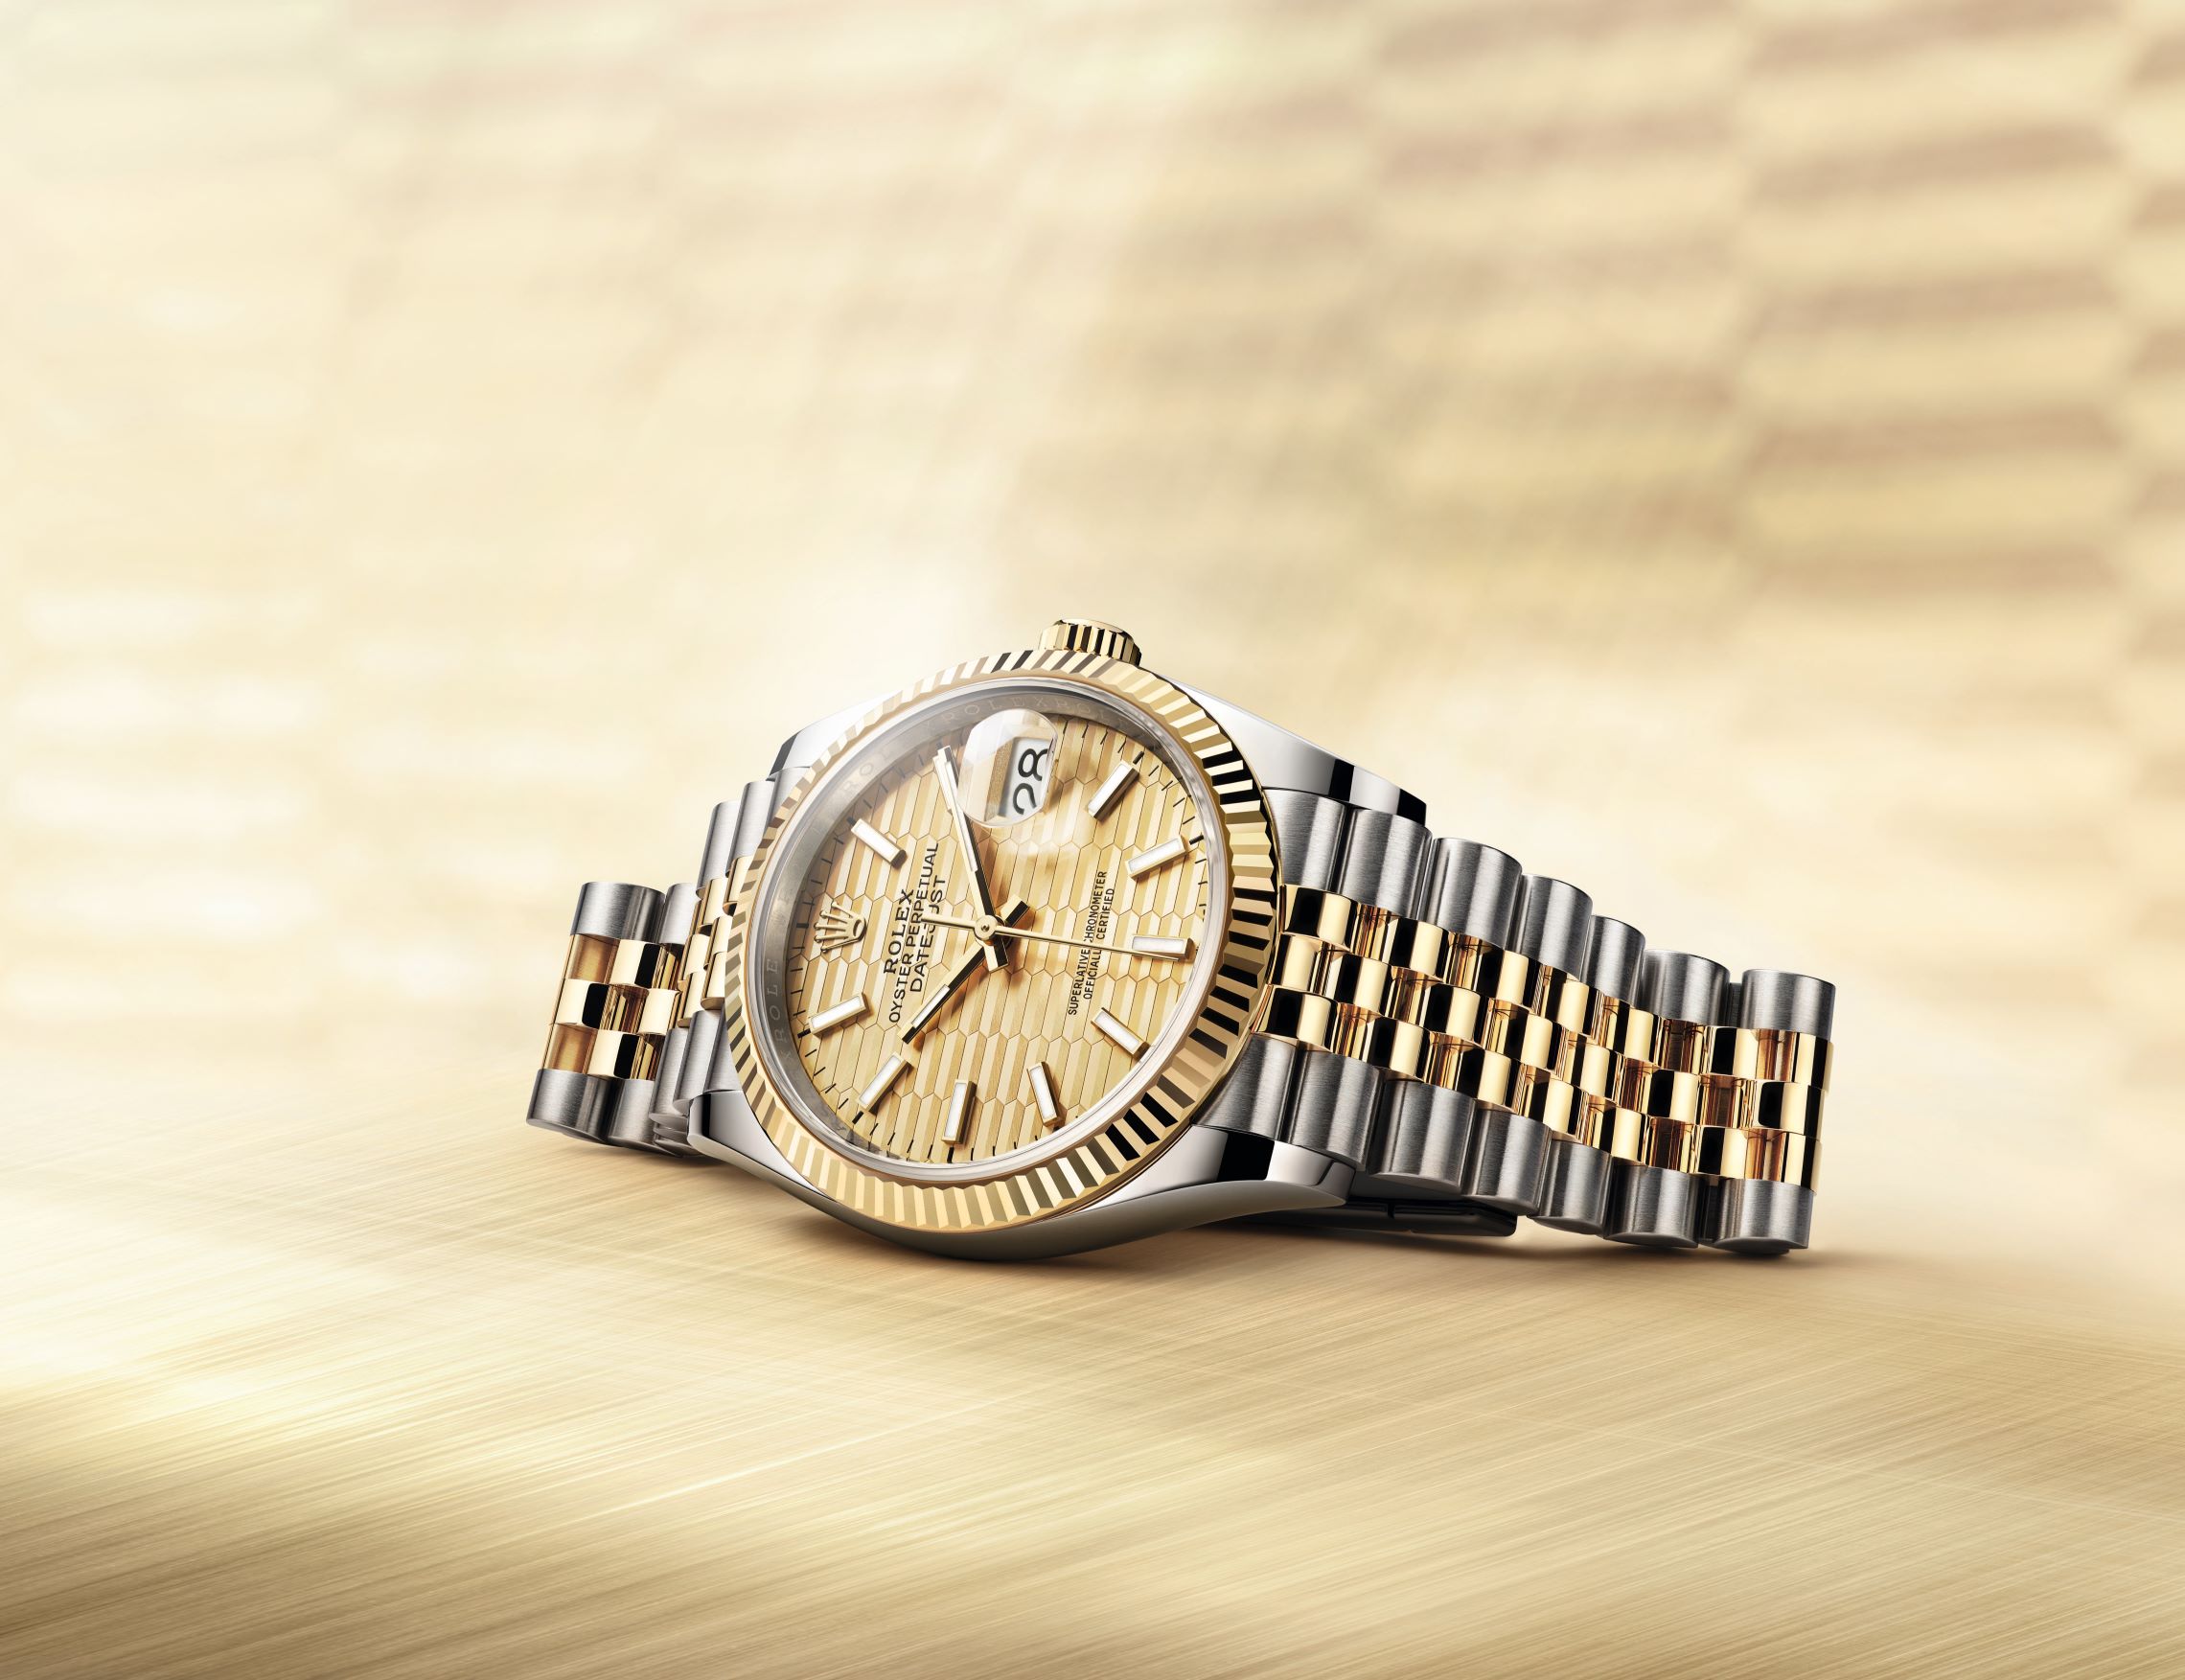 Rolex Releases 5 New Luxury Models For Watches and Wonder - Maxim